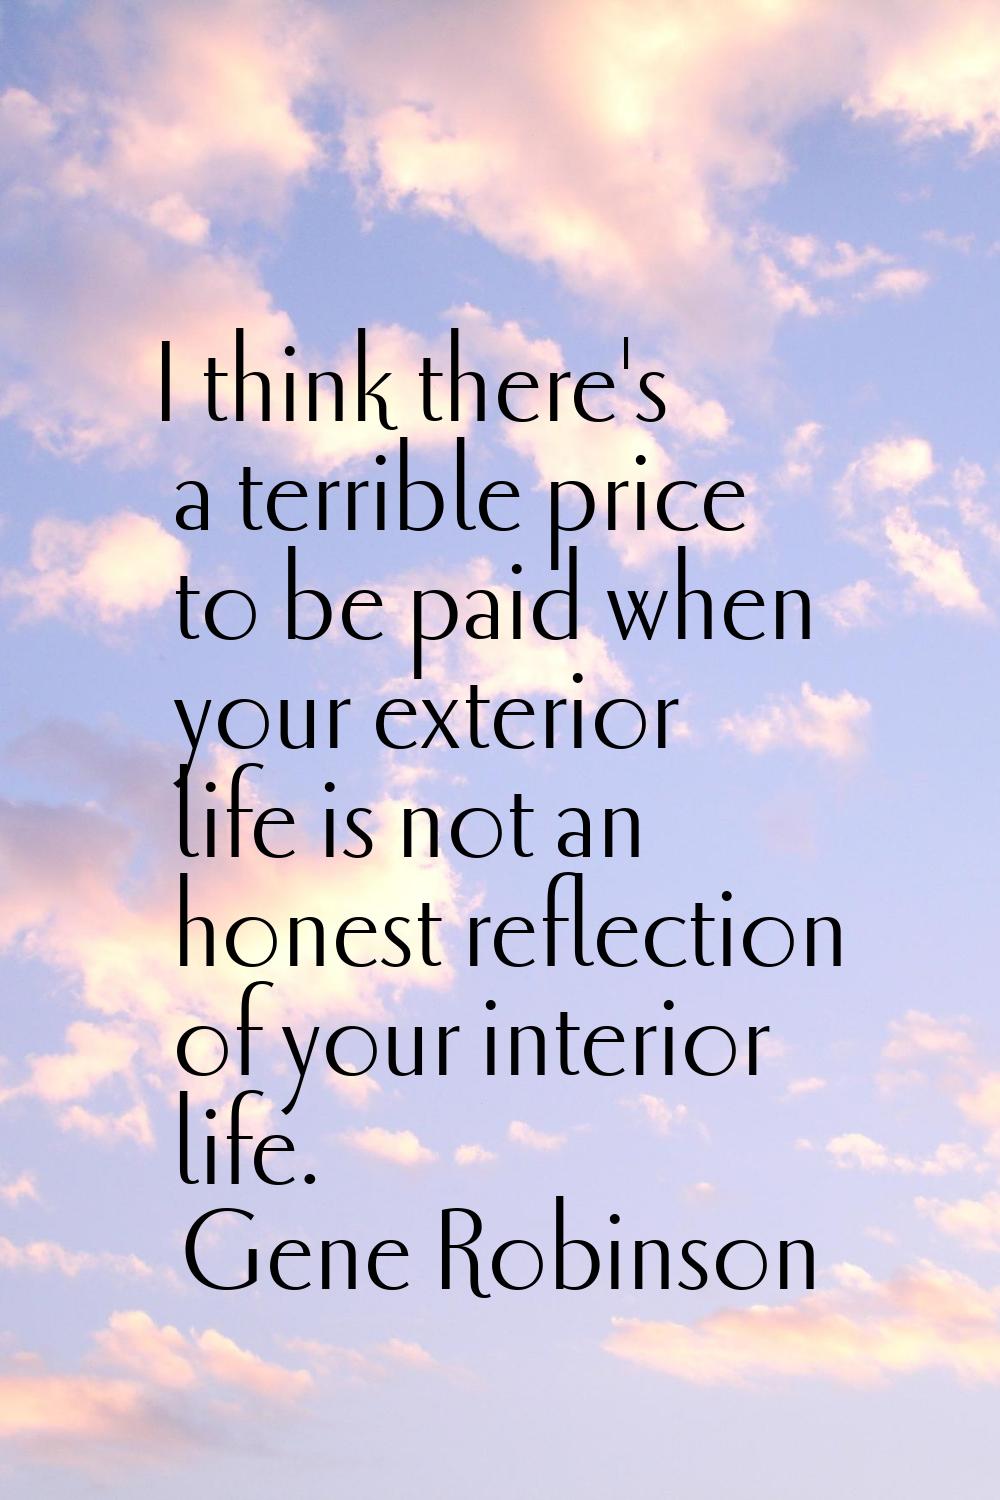 I think there's a terrible price to be paid when your exterior life is not an honest reflection of 